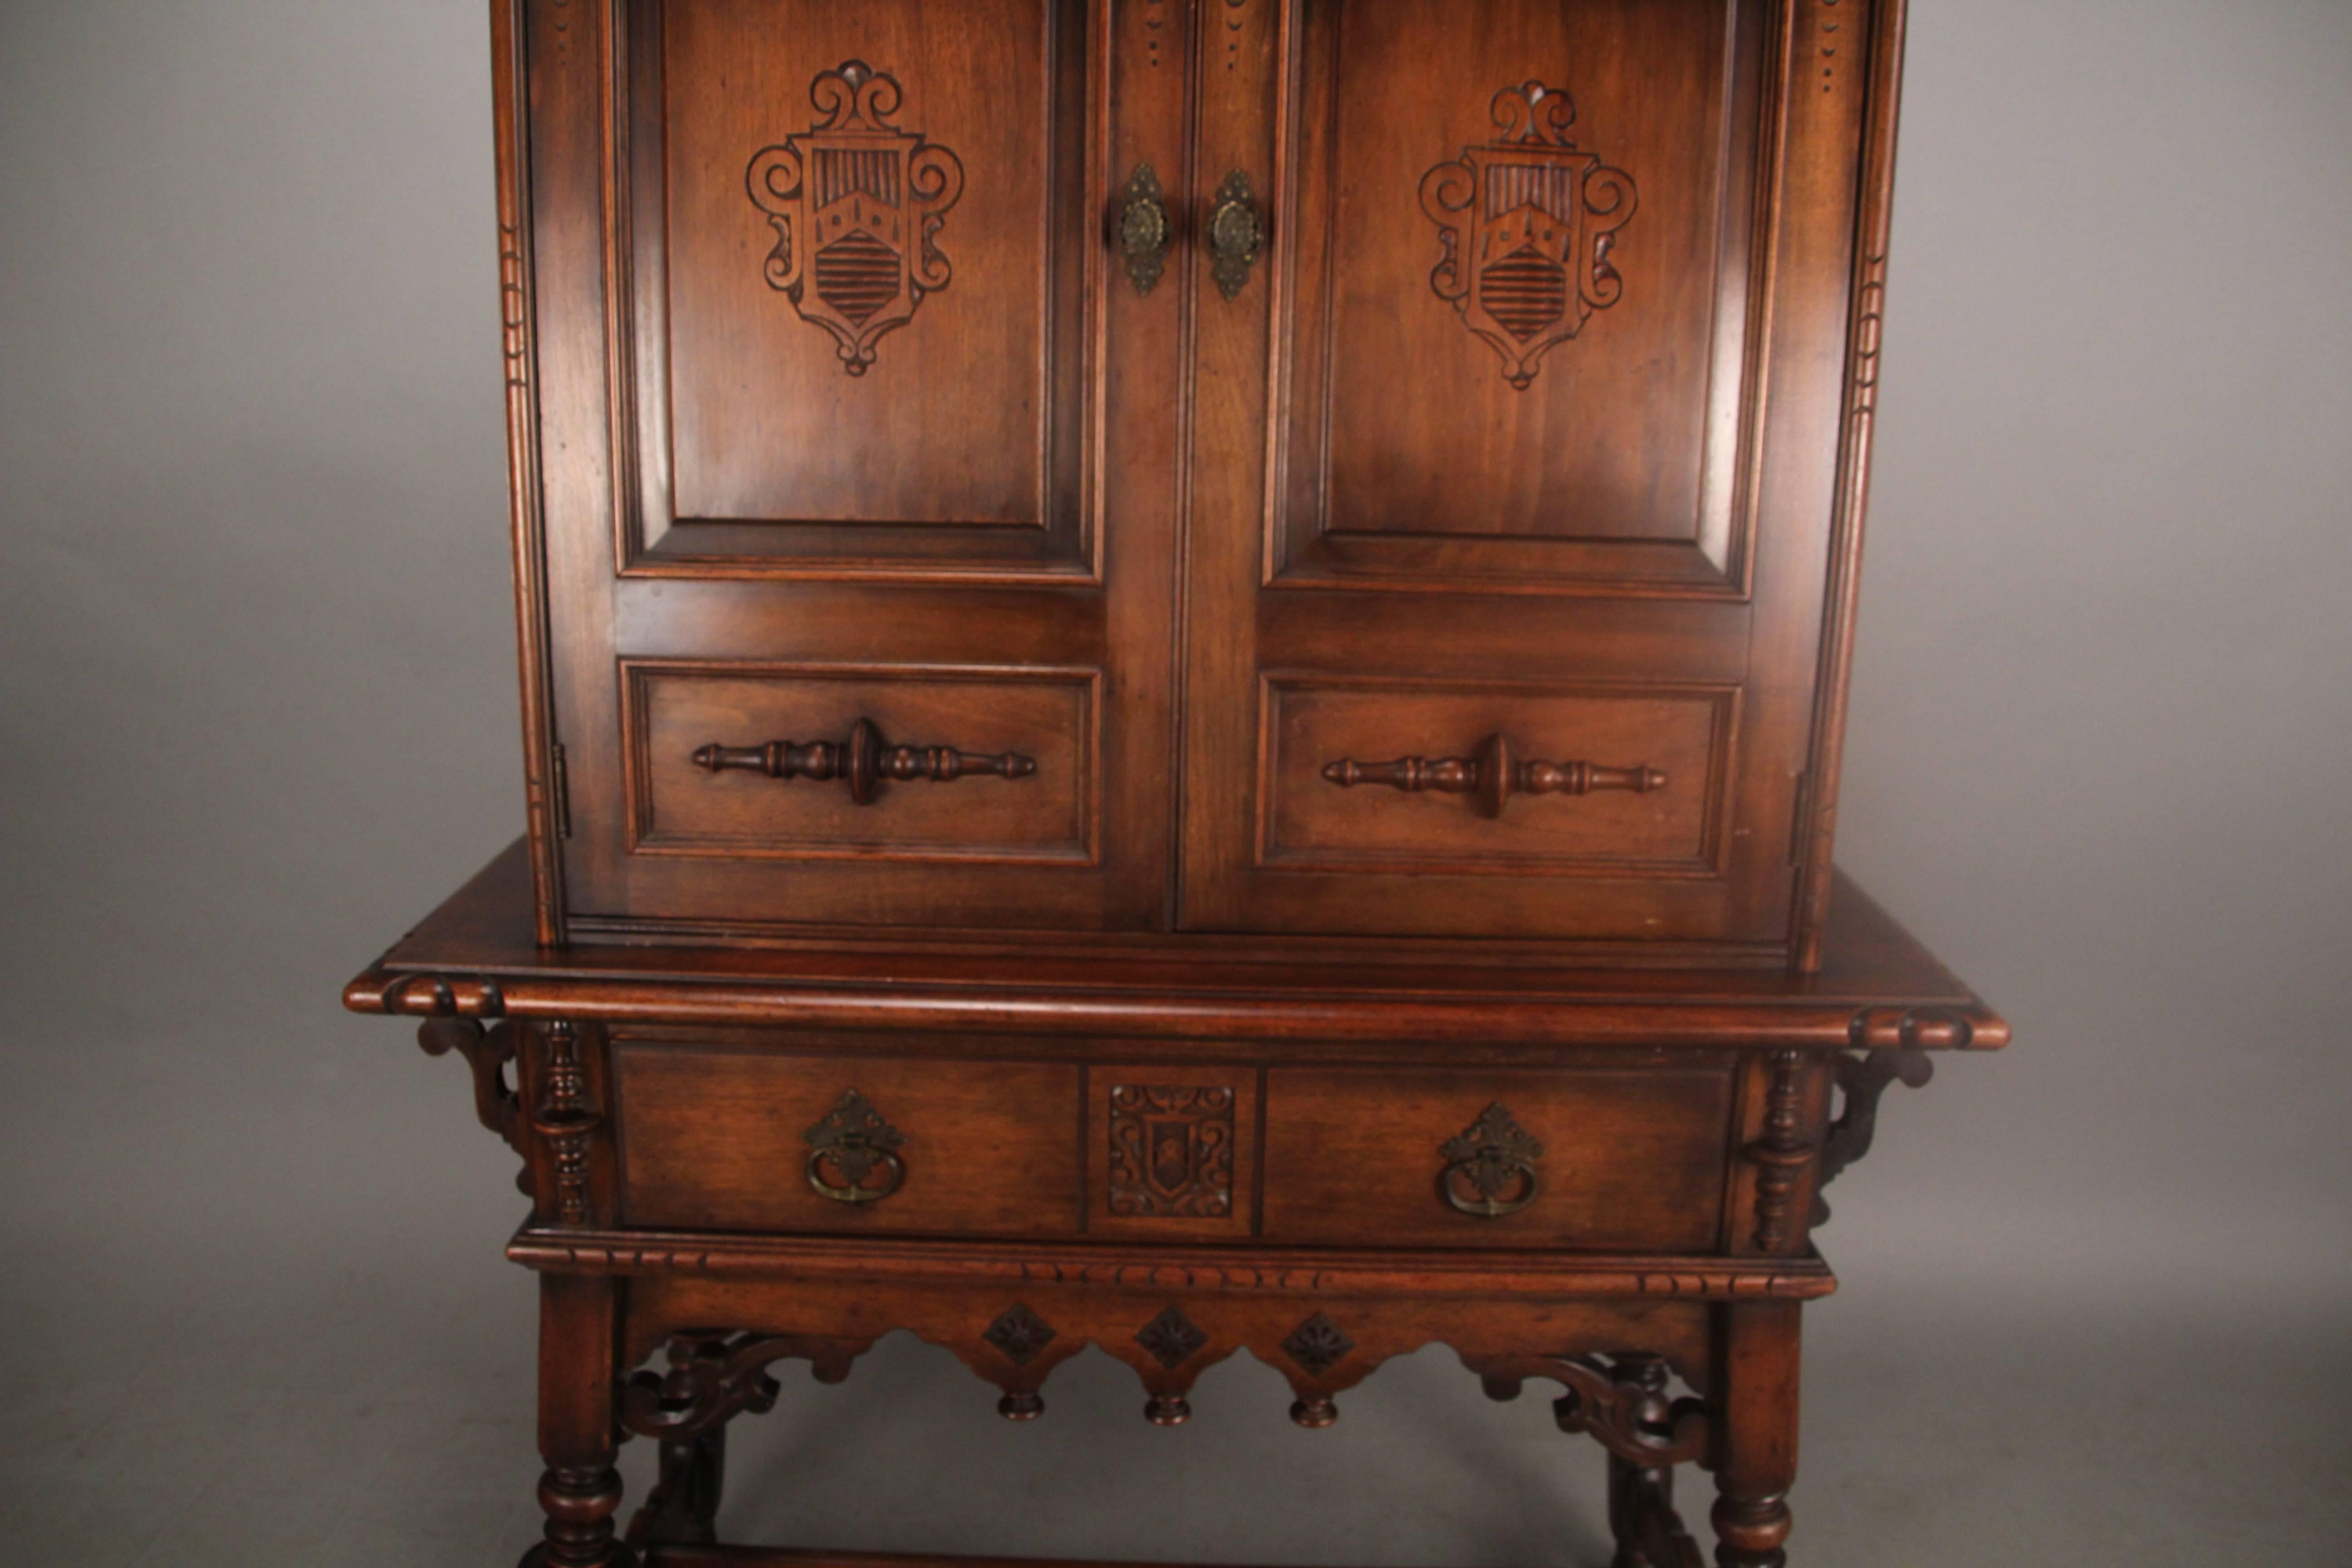 Beautiful cabinet with lots of storage and nice attention to detail. Measures: 65.25